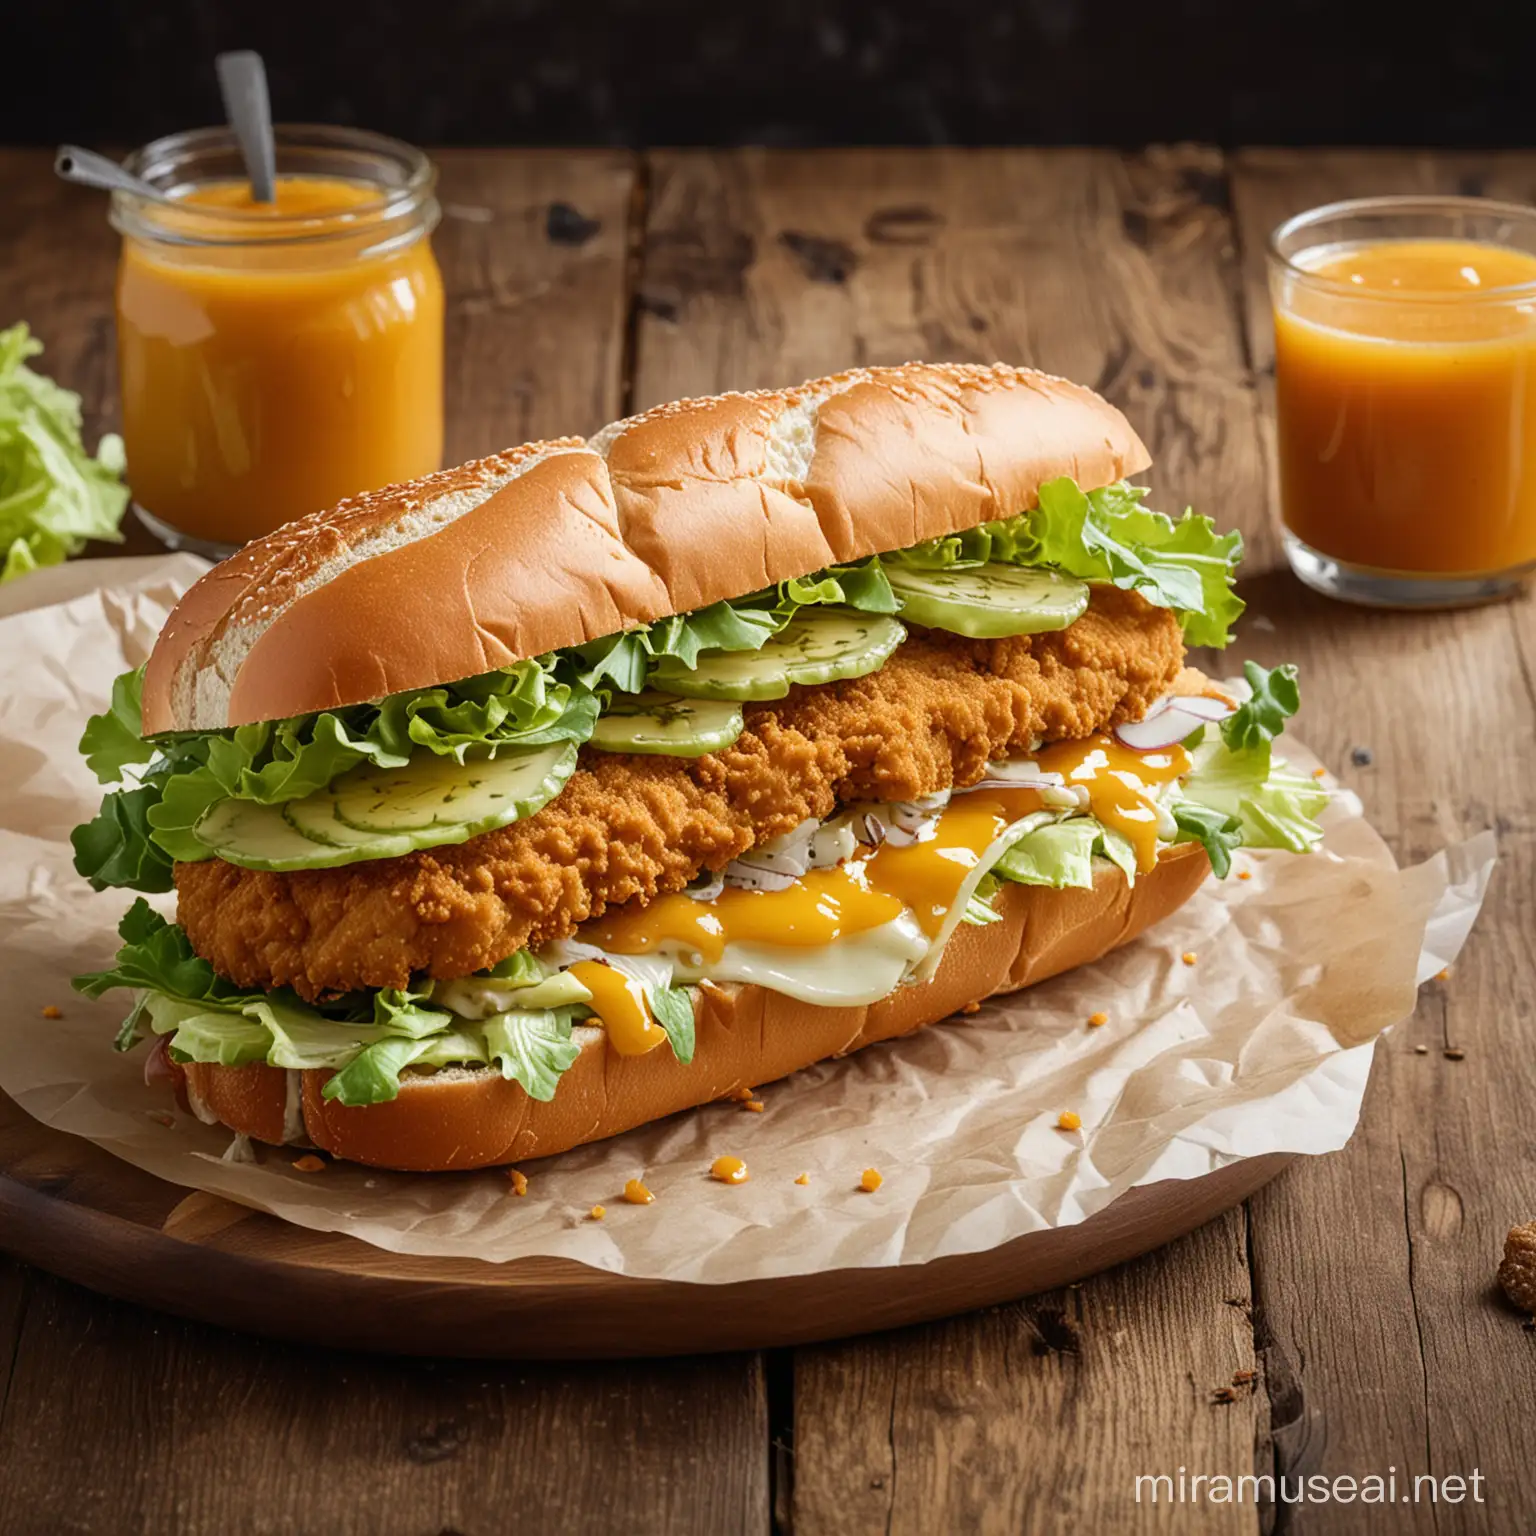 Crispy Breaded Schnitzel Sandwich with Tangy Orange Sauce and Fresh Greens